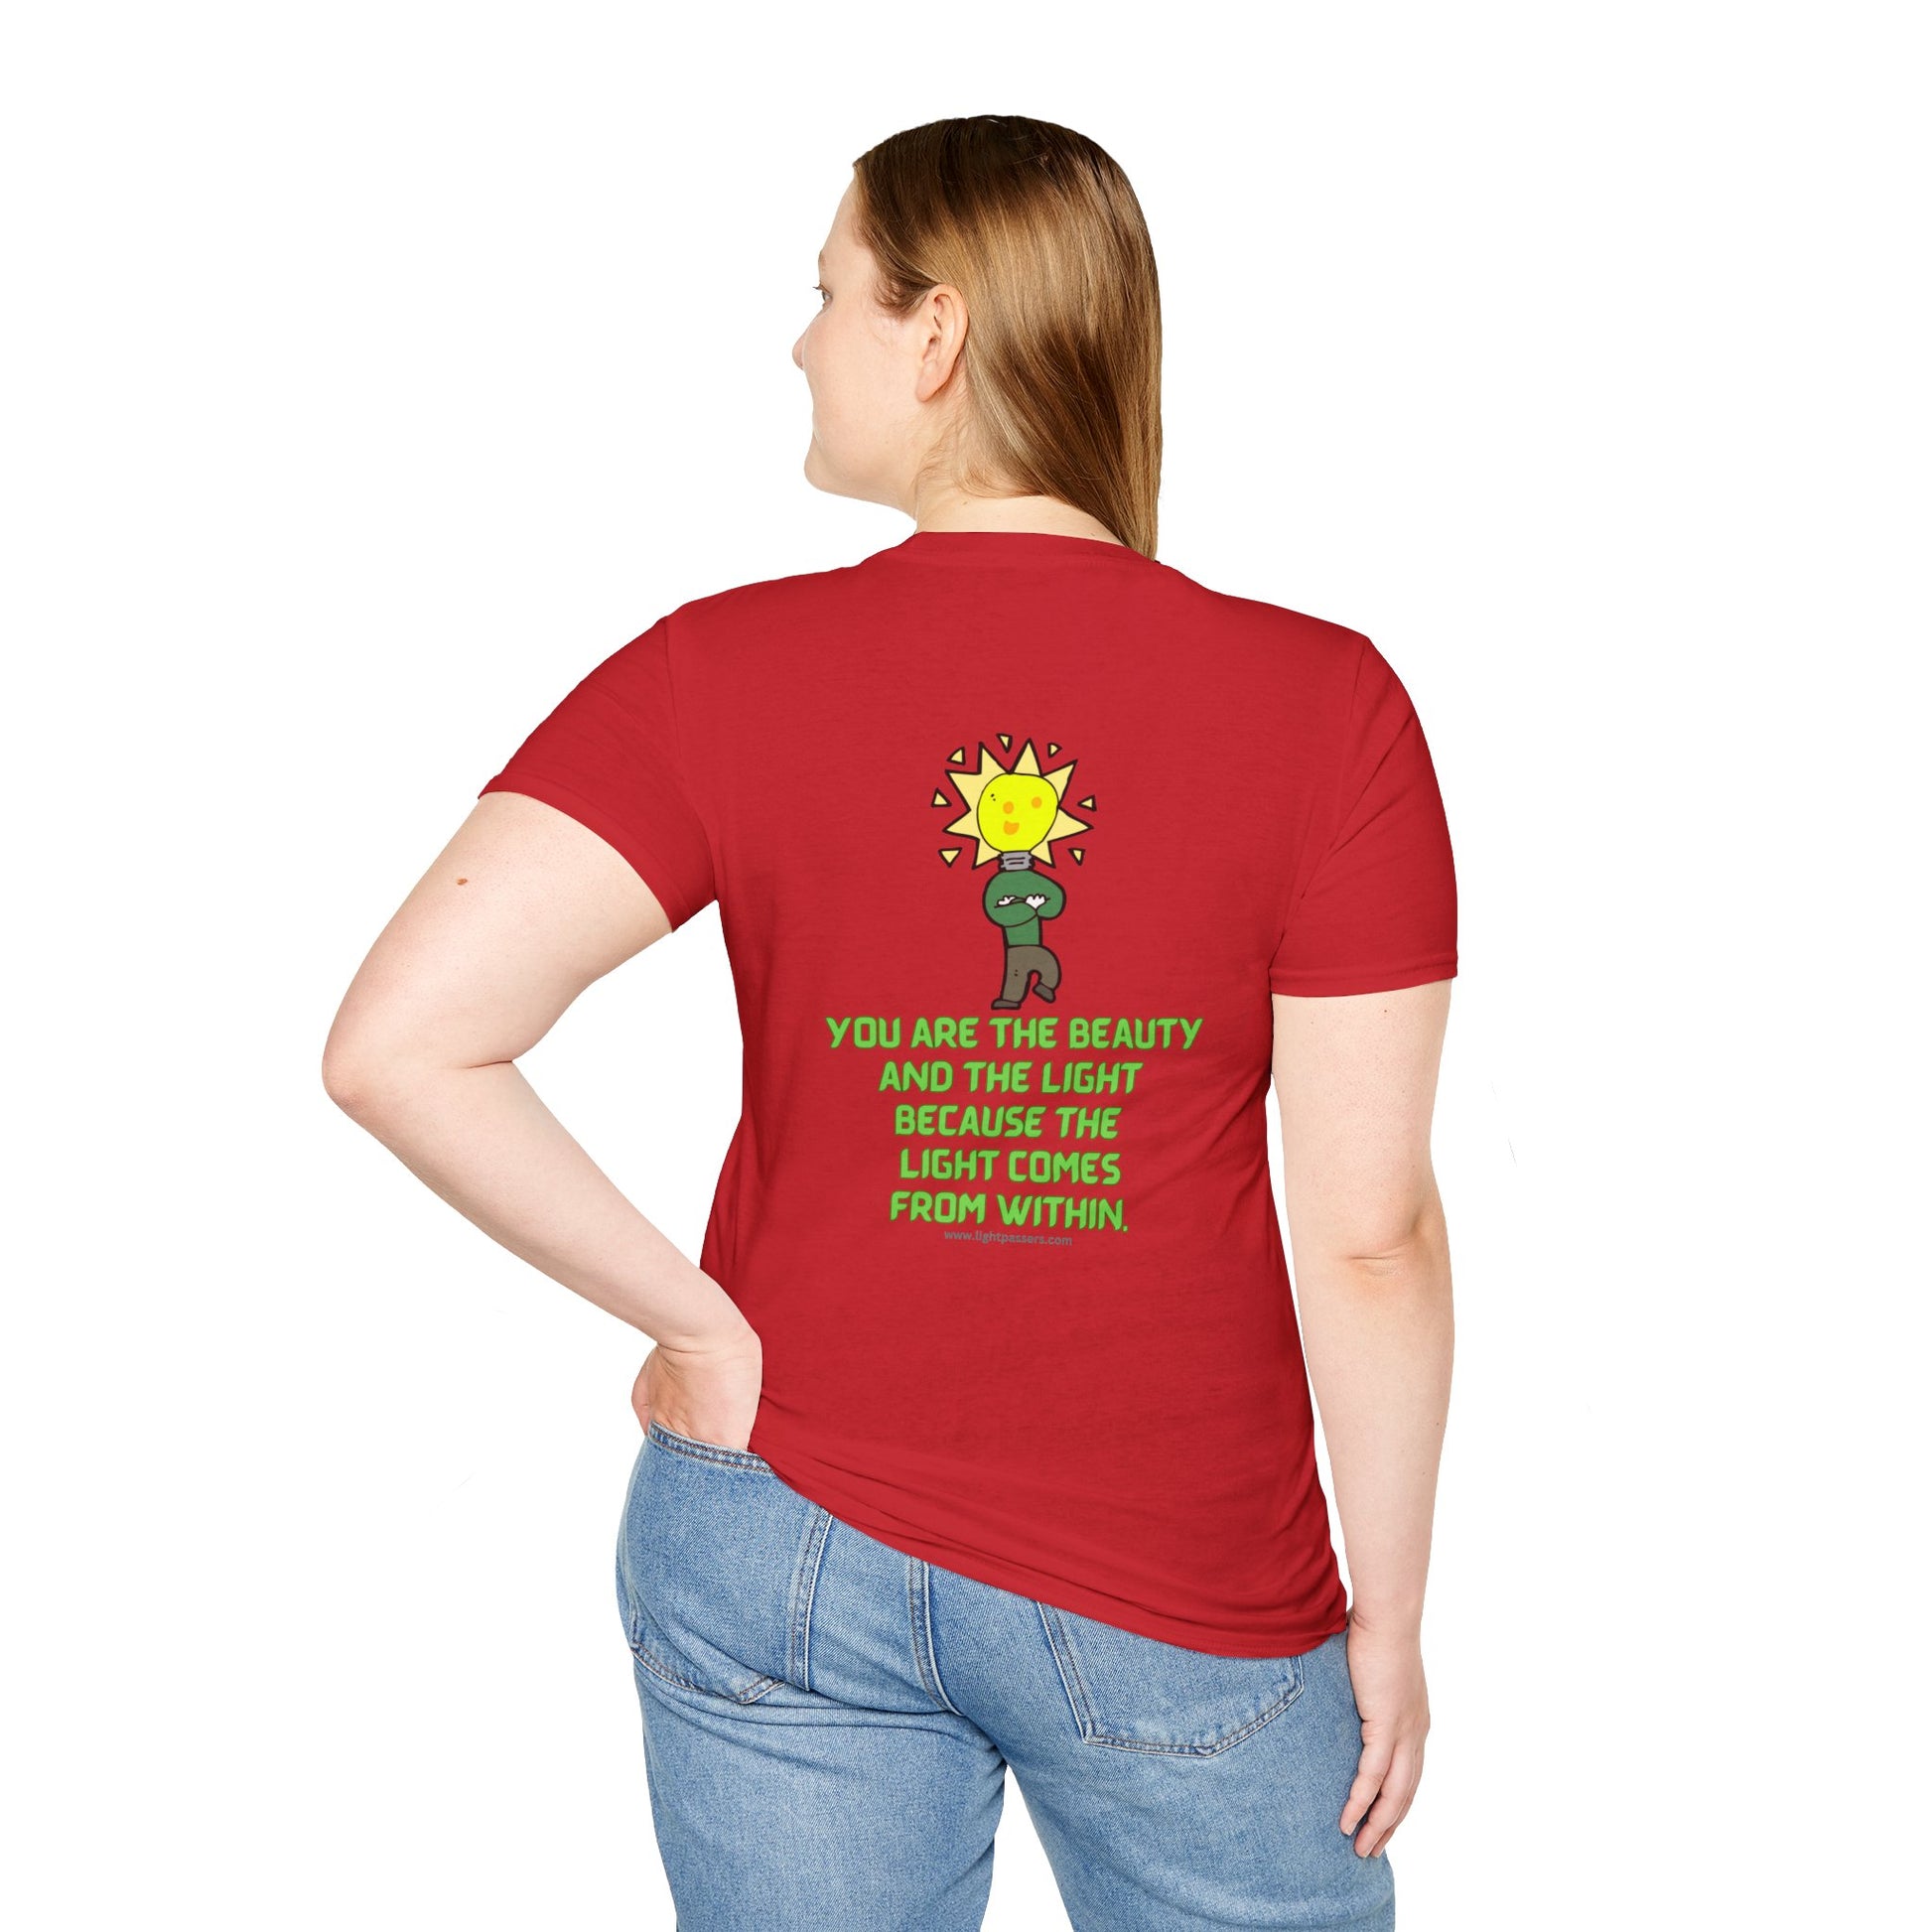 Unisex Beauty and the Light tee BACK: A person in jeans wears a red shirt. No side seams for comfort, tape on shoulders for durability. 100% cotton, classic fit.